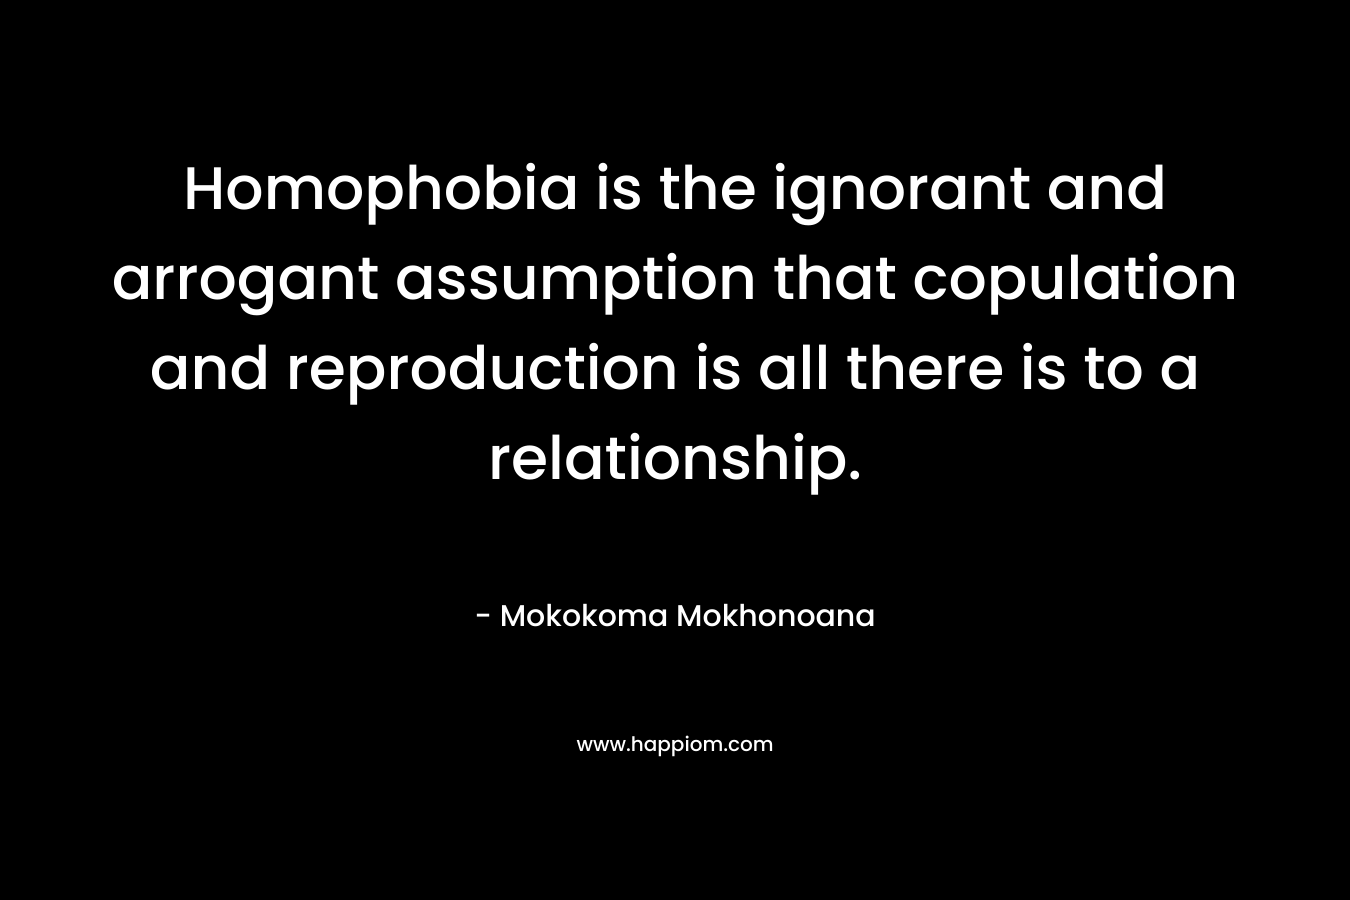 Homophobia is the ignorant and arrogant assumption that copulation and reproduction is all there is to a relationship.